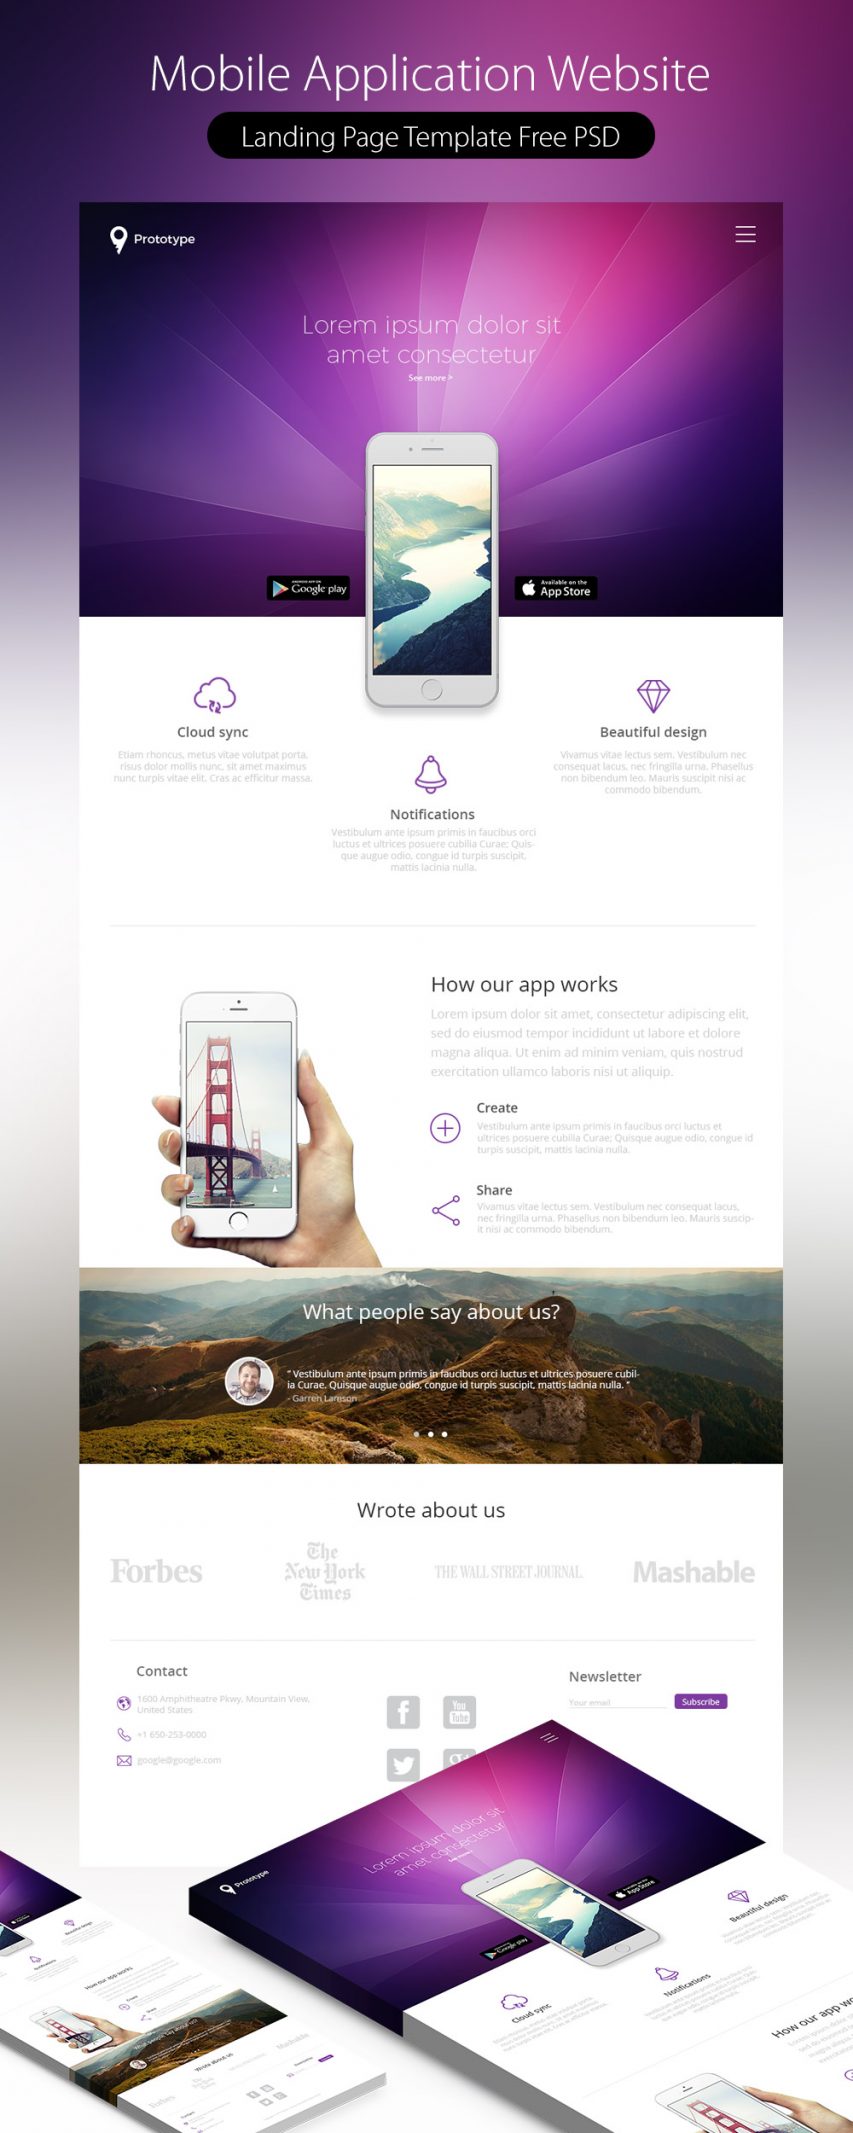 Mobile Application Landing Page Template Free